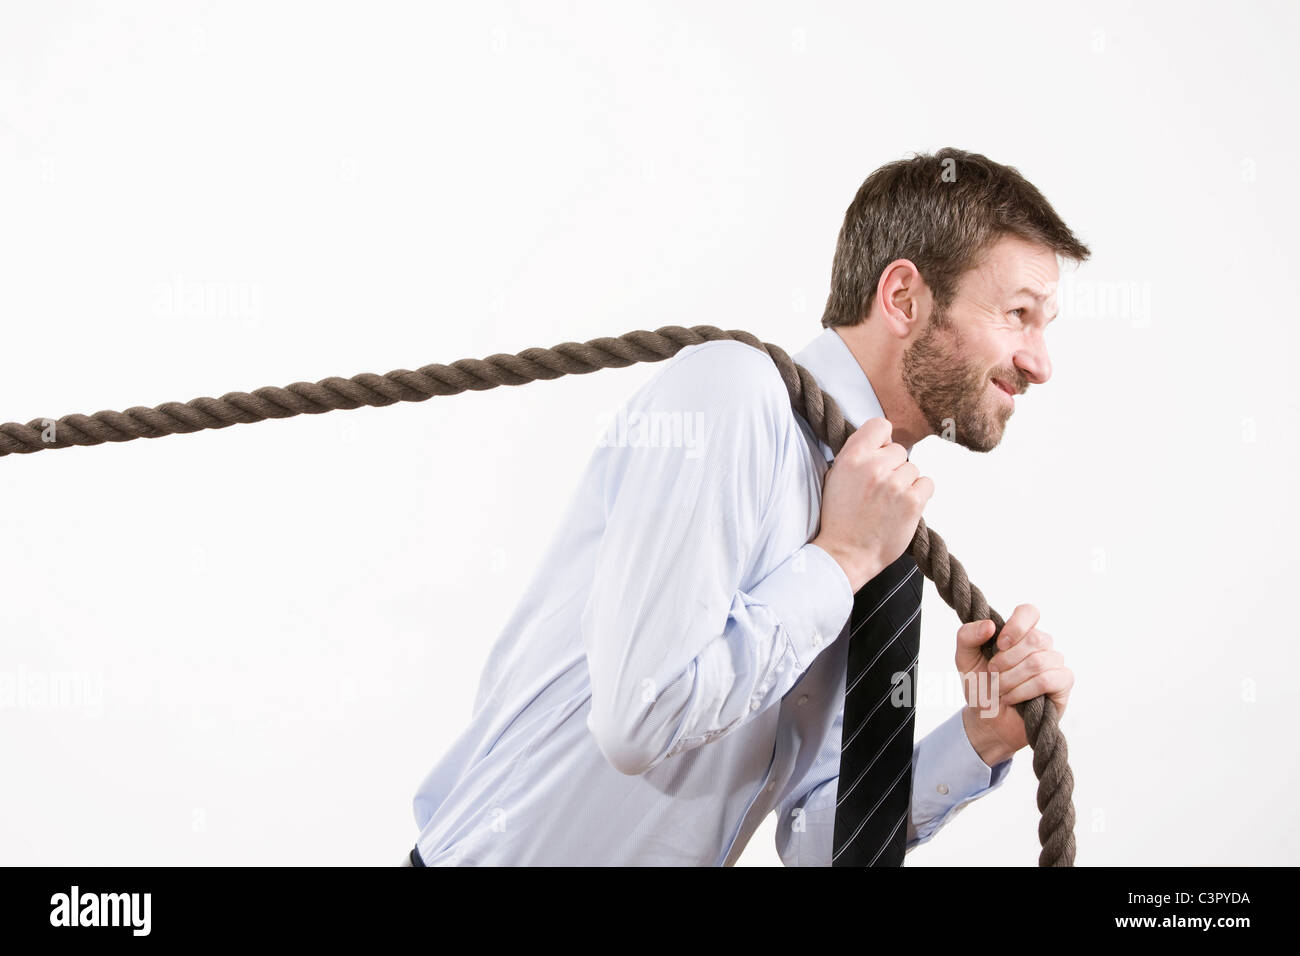 Businessman pulling rope, side view Stock Photo